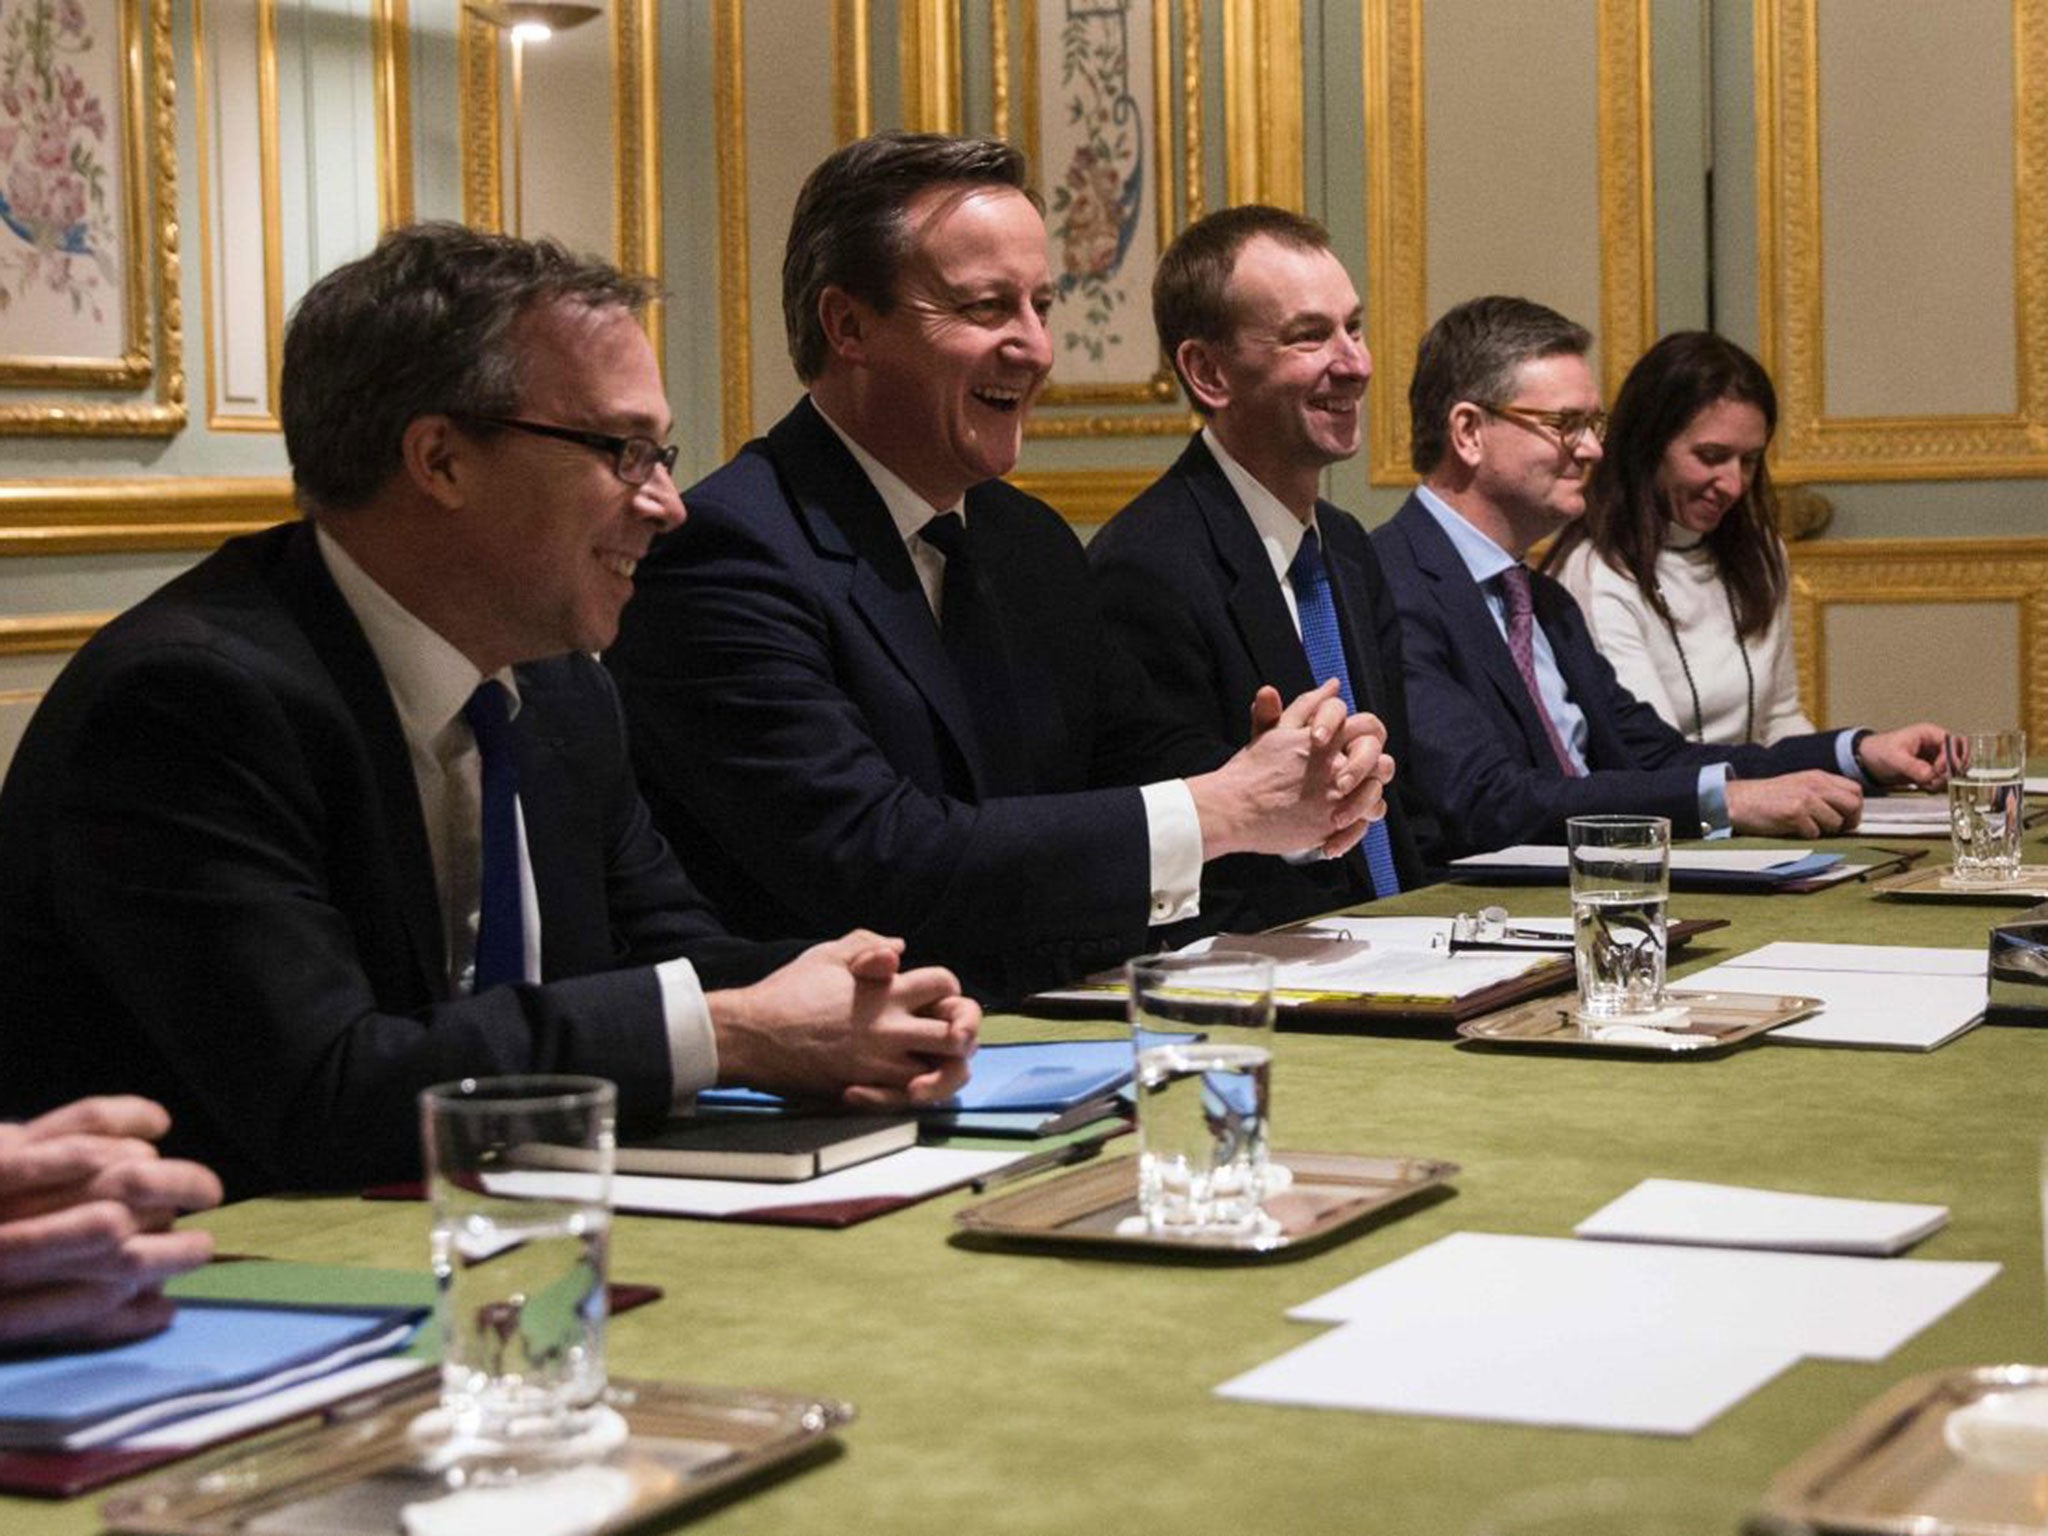 David Cameron has been in Paris for talks with President Francois Hollande